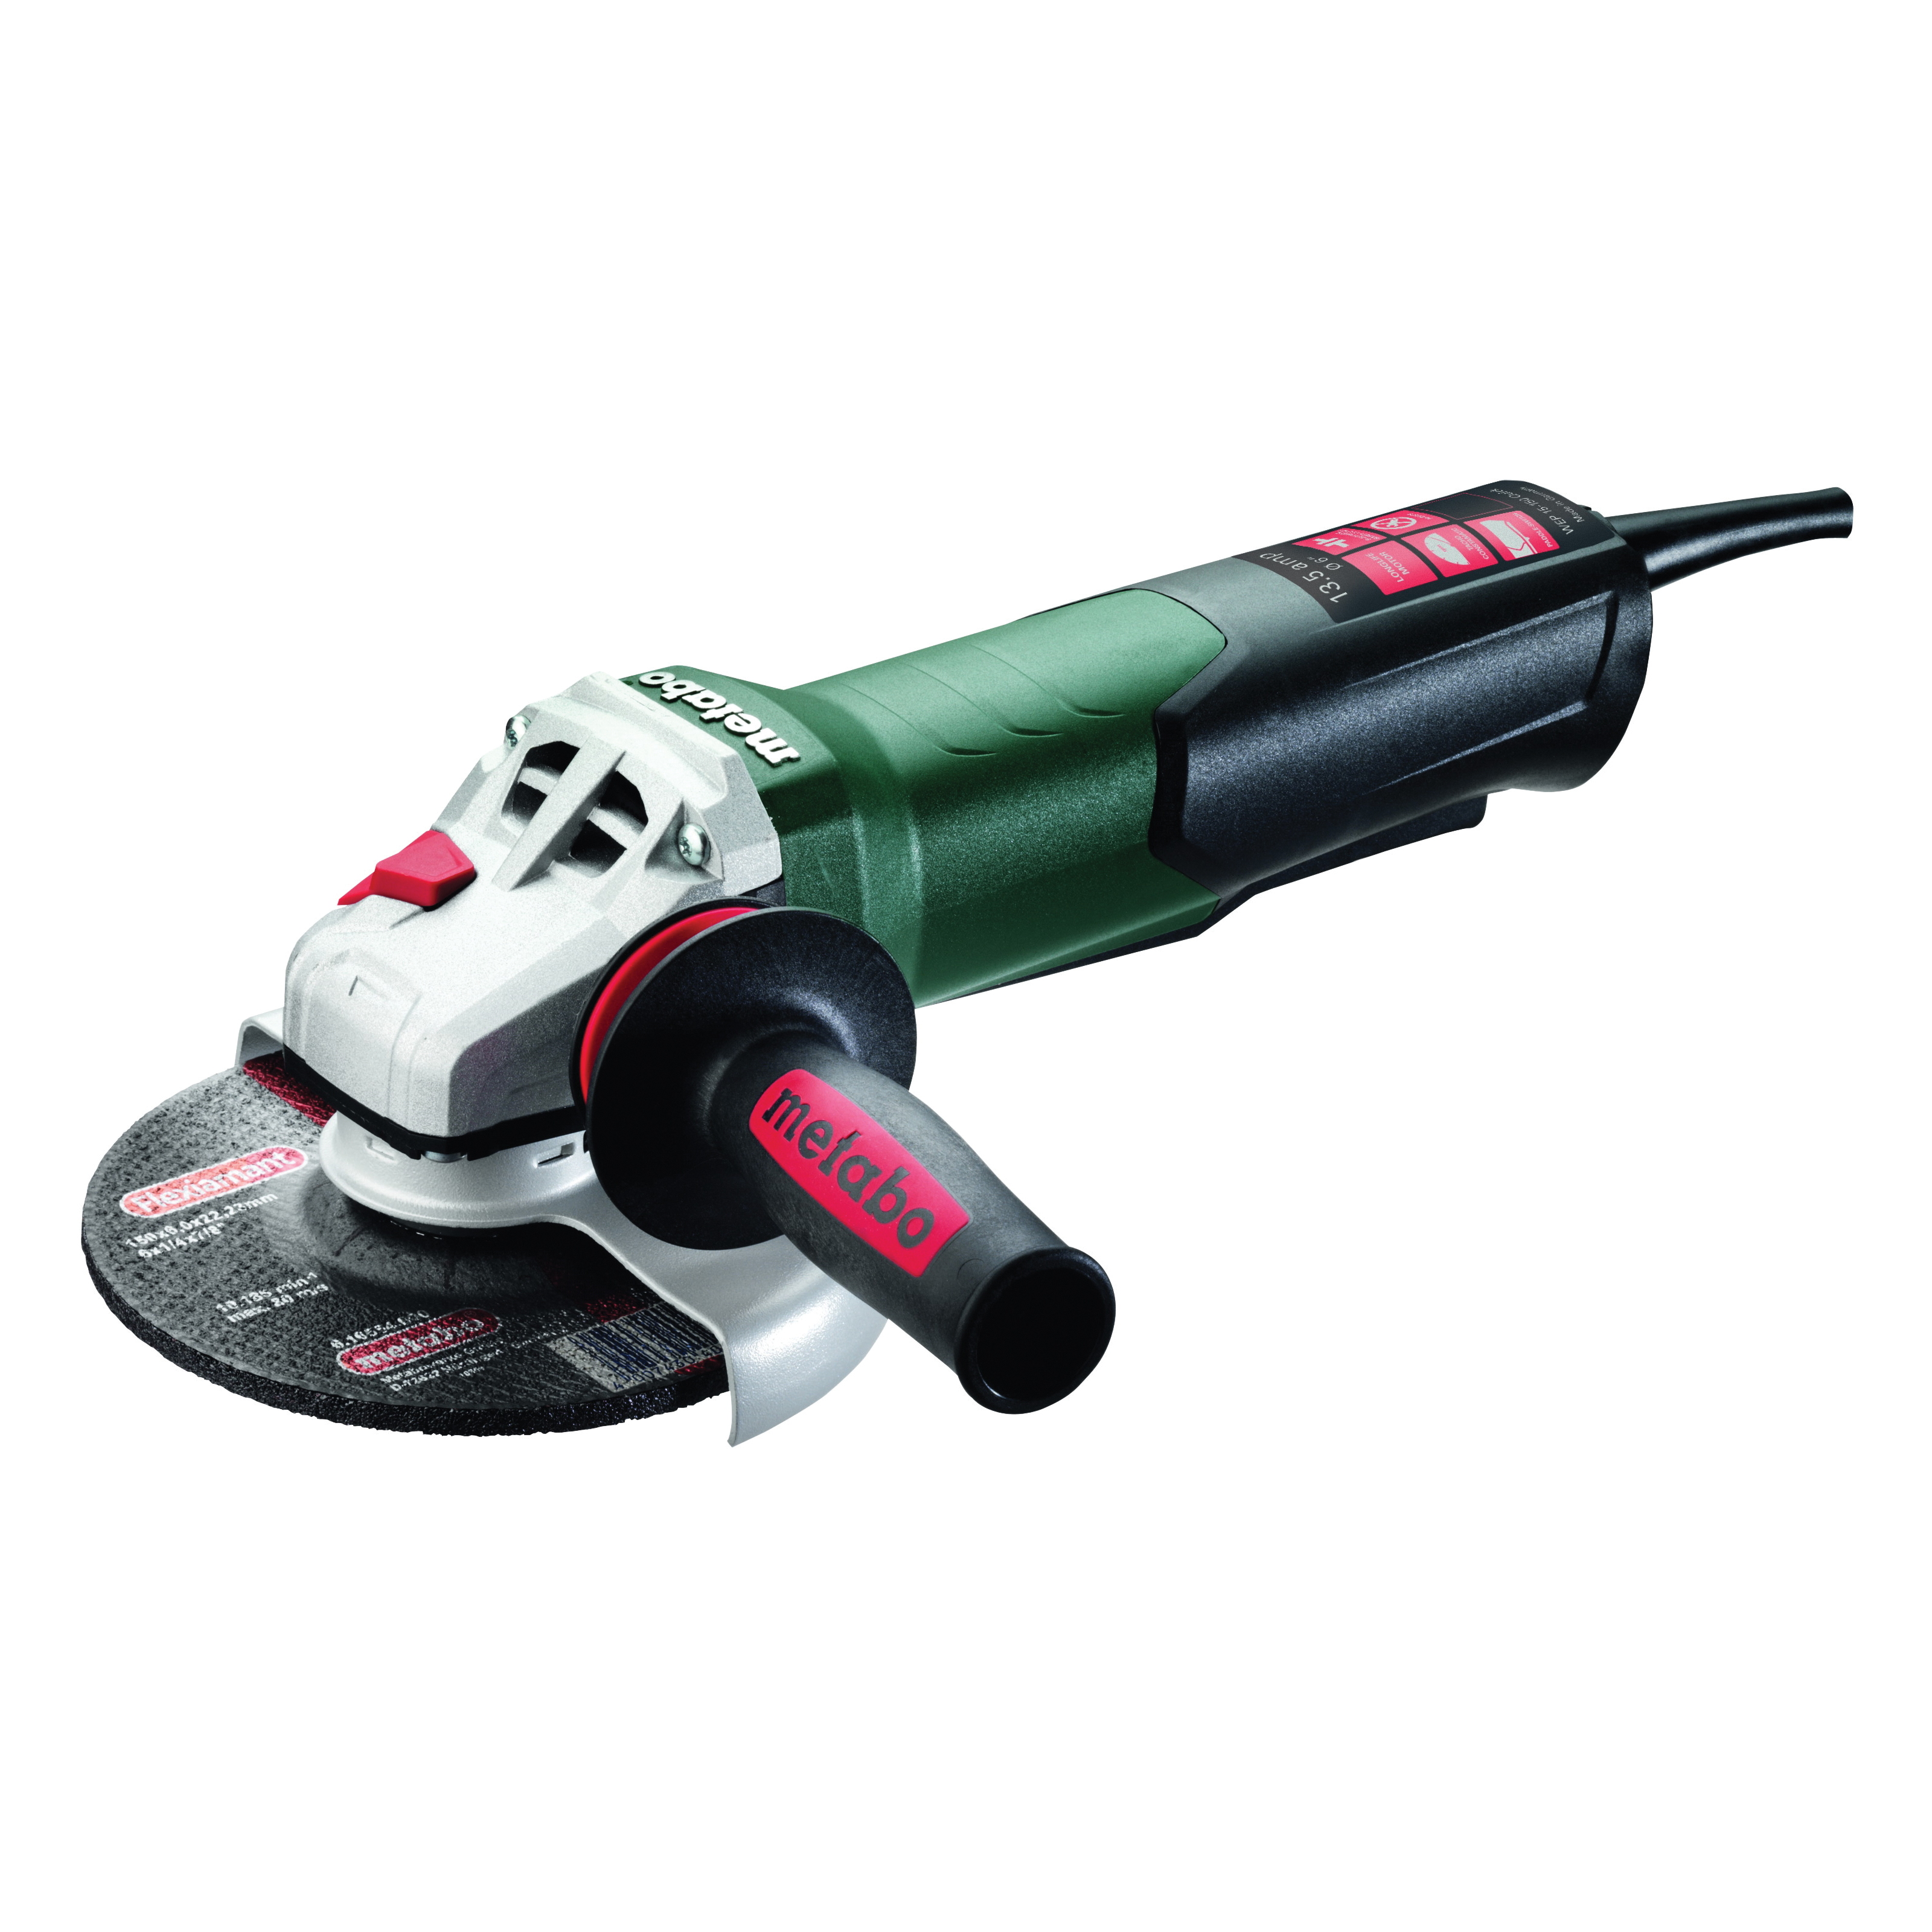 metabo® 600465420 Electric Angle Grinder, 5 in Dia Wheel, 5/8-11 UNC Arbor/Shank, 110 to 120 VAC